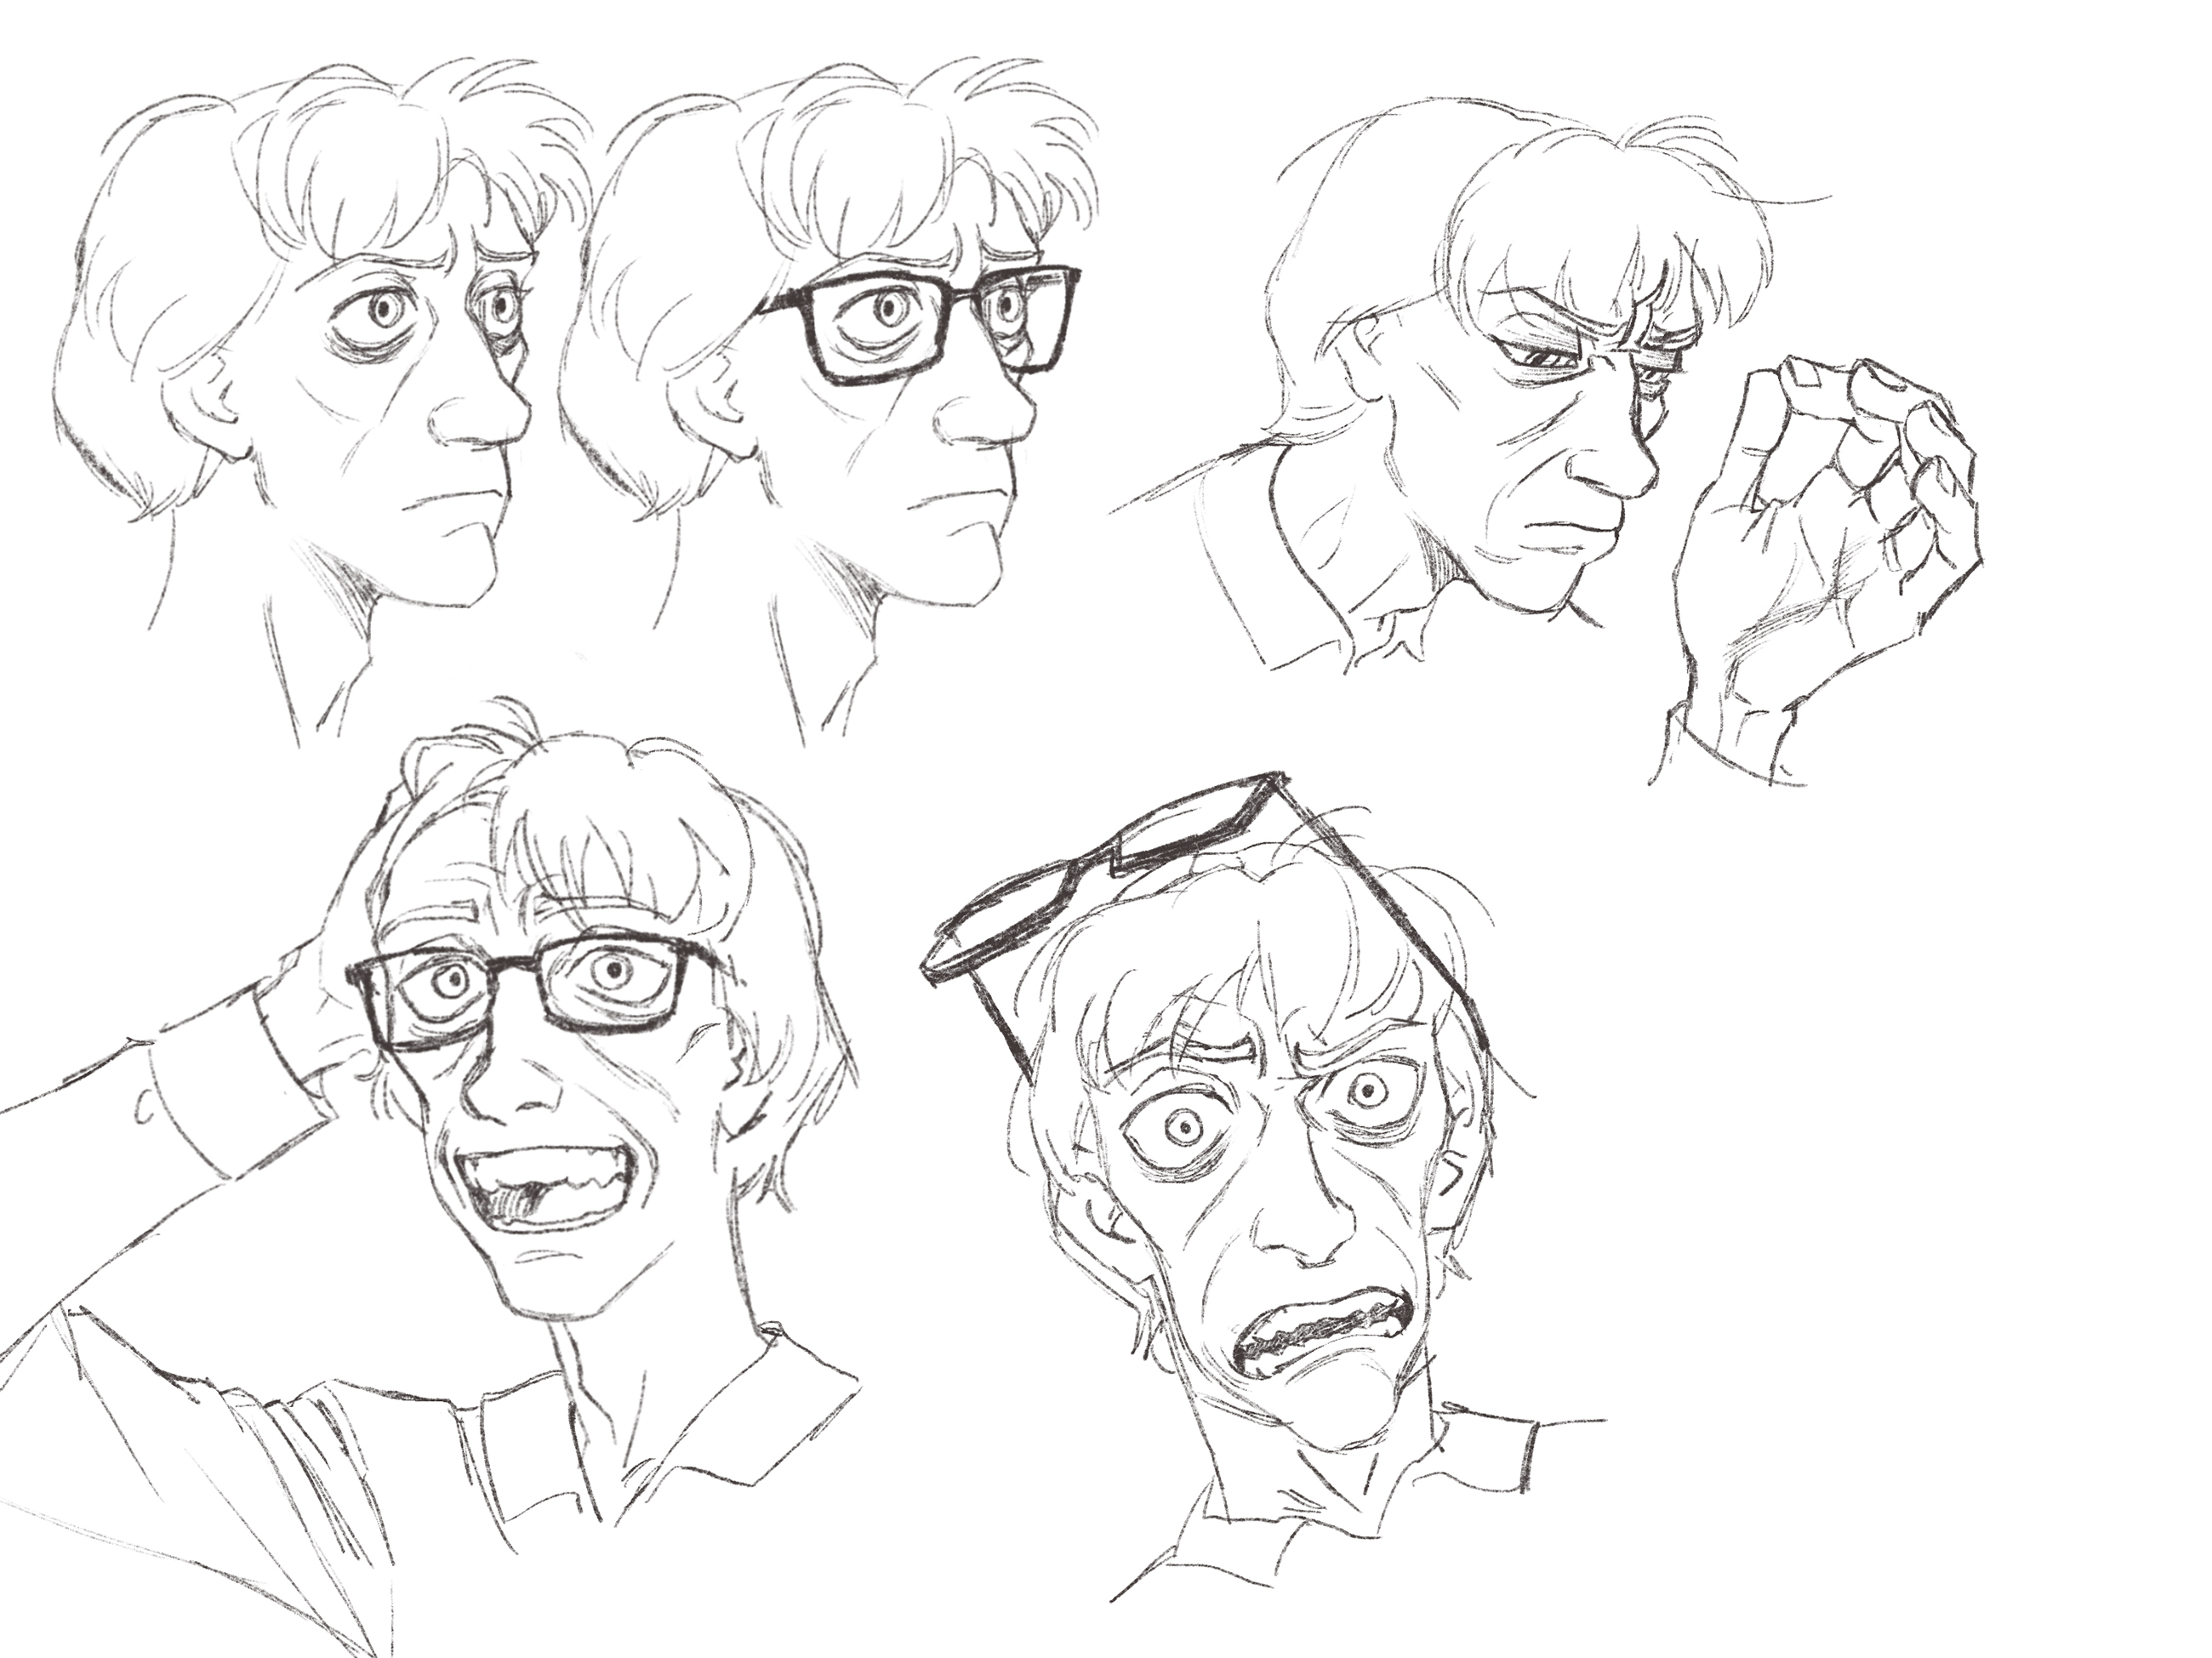 multiple sketches of the same face explore expressions